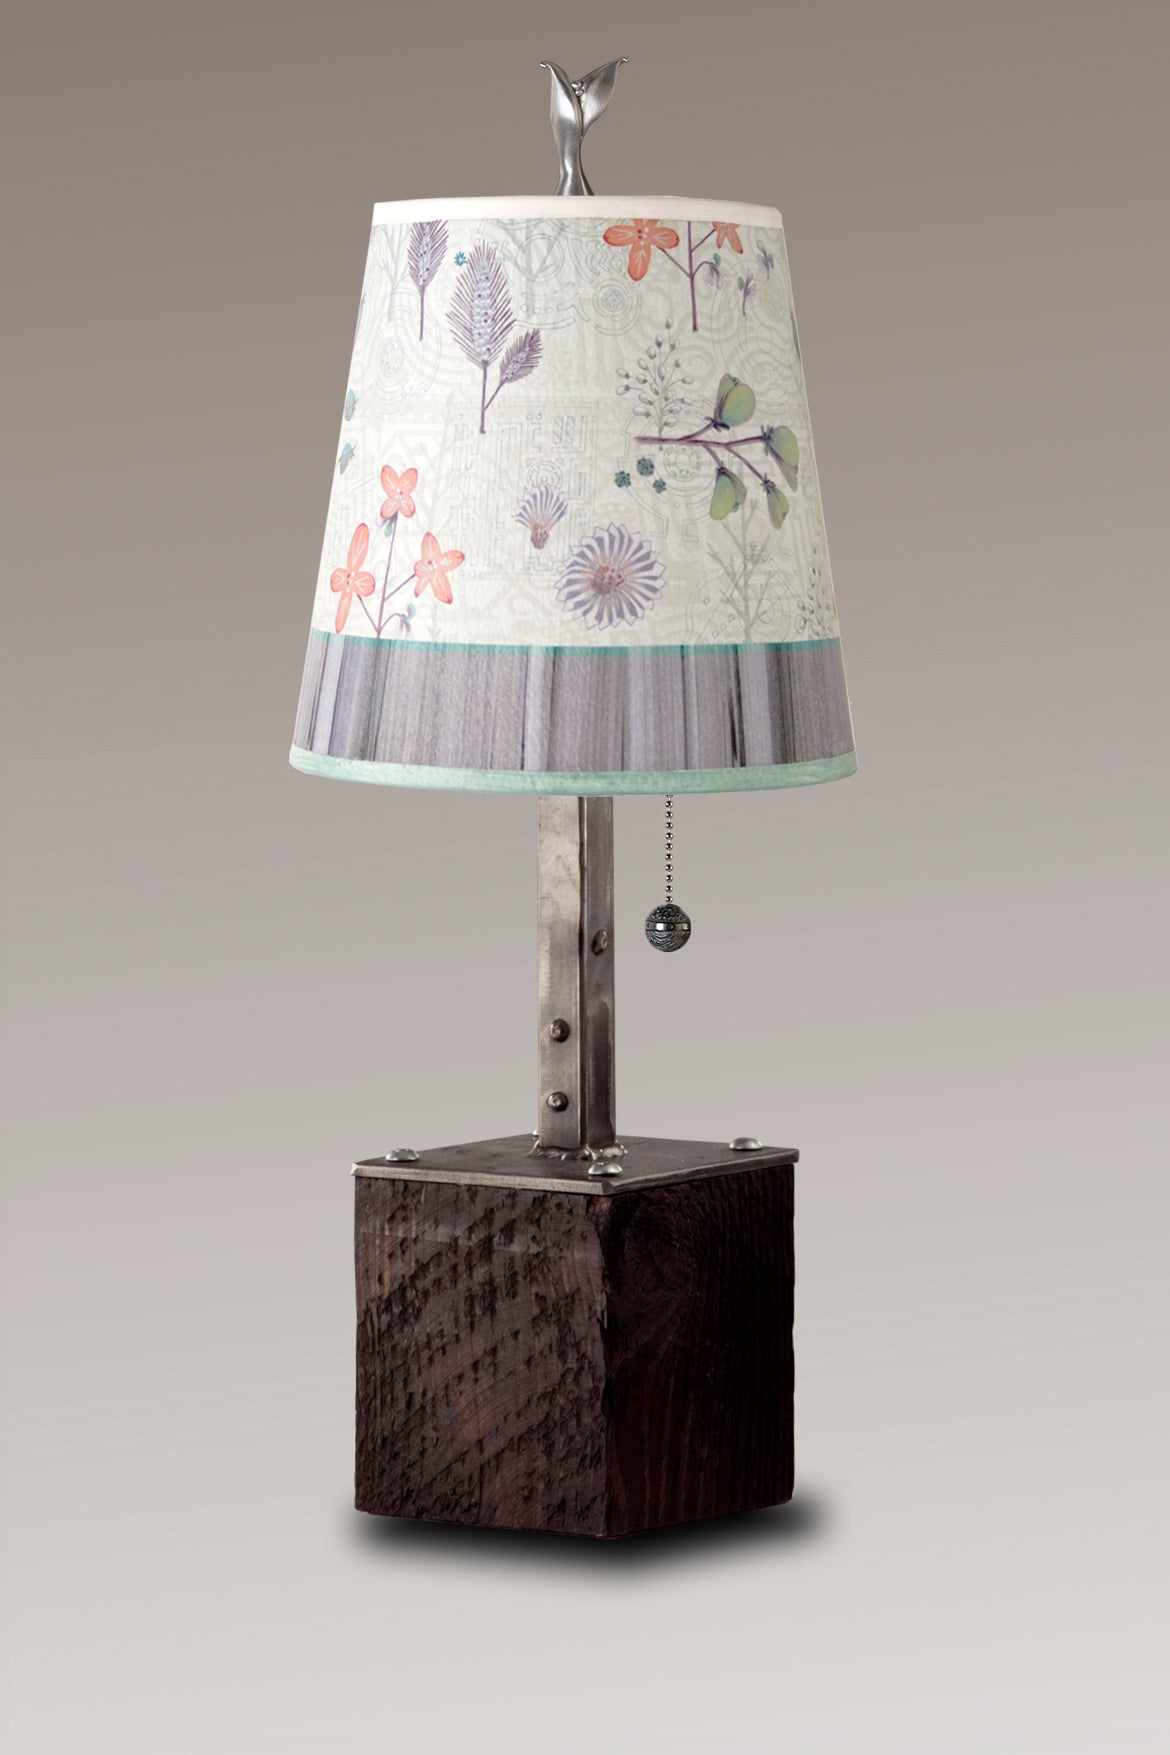 Janna Ugone &amp; Co Table Lamps Steel Table Lamp on Reclaimed Wood with Small Drum Shade in Flora &amp; Maze